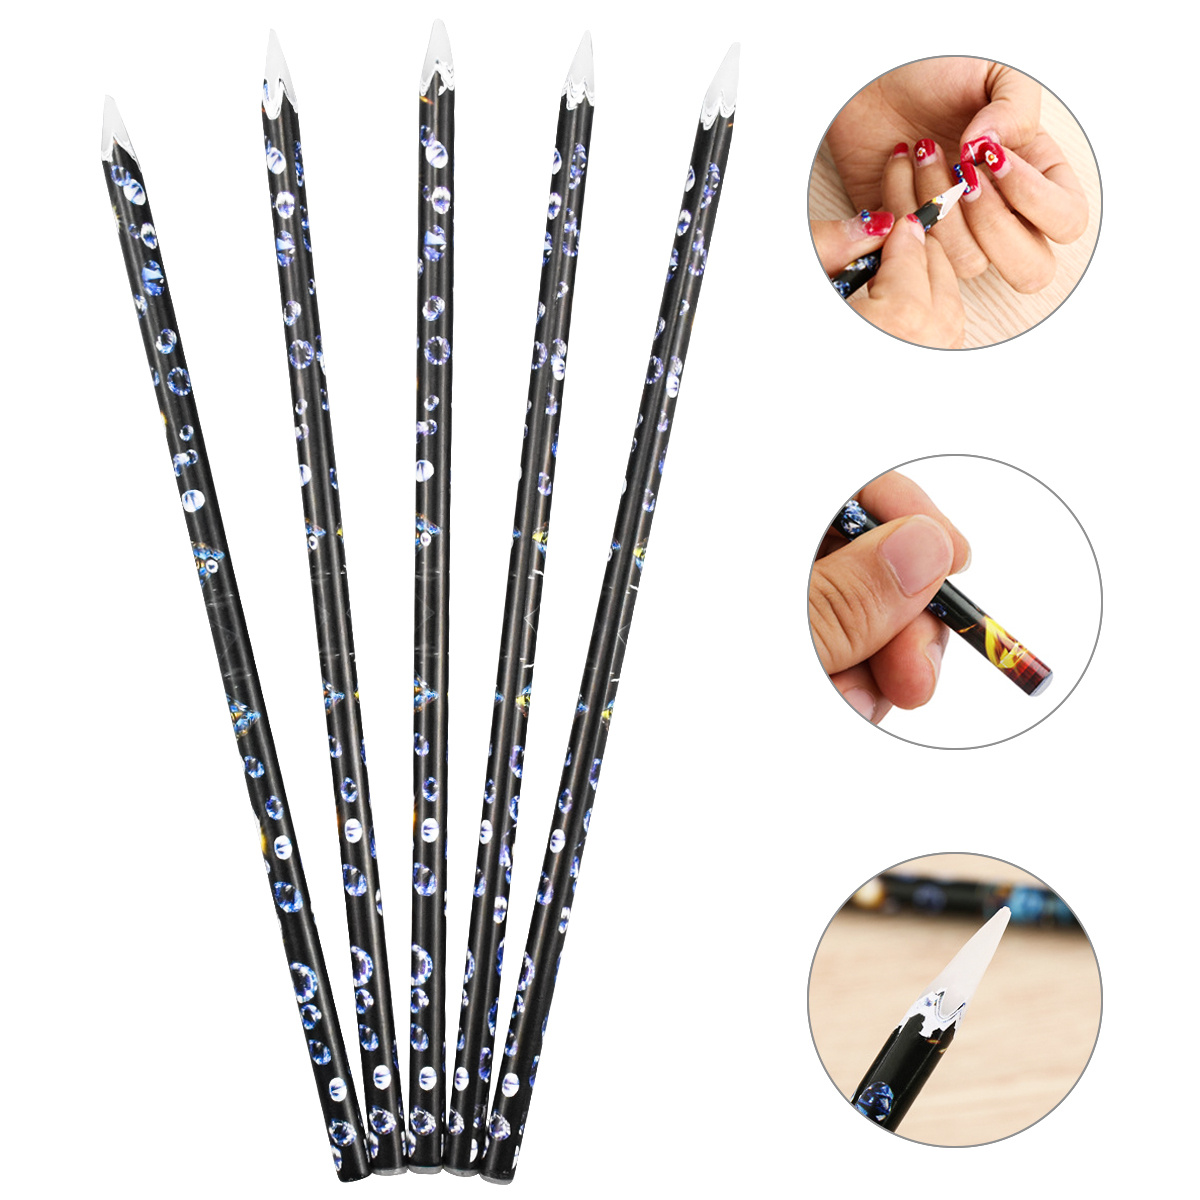 Candy-colored Nail Tweezers Rhinestones Stickers Picking Tool Straight Hook  Picker Dead Skin Remover Makeup Nail Art Tools